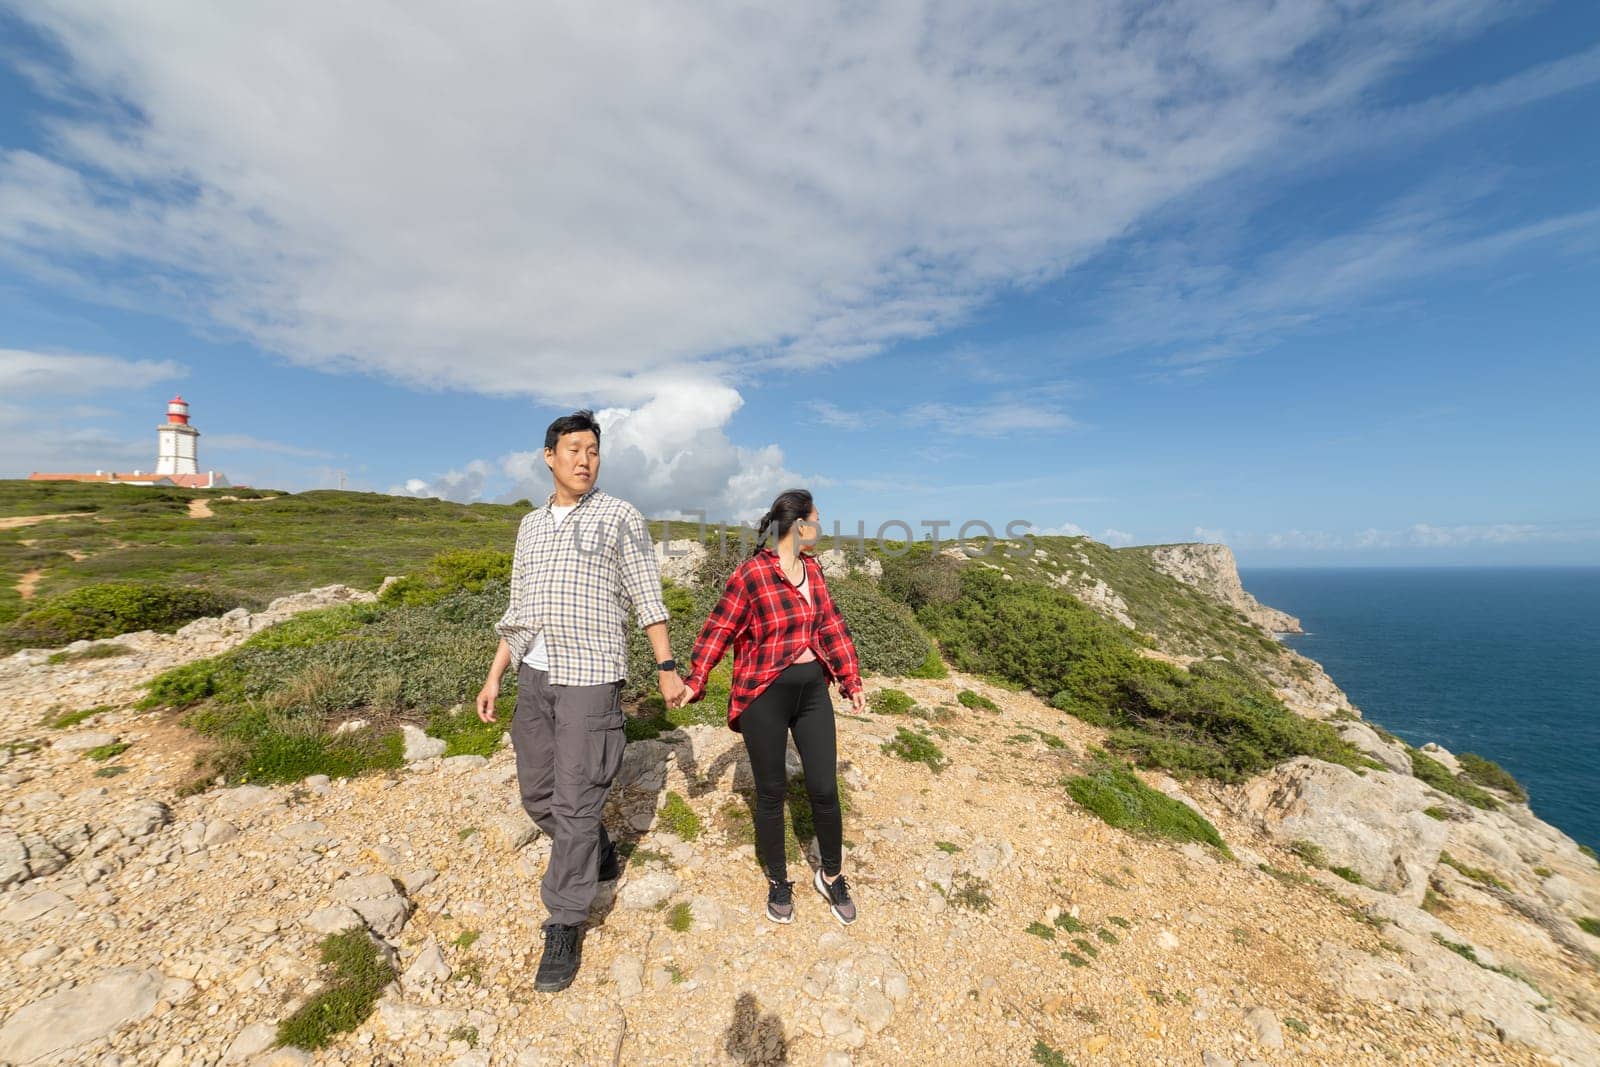 A couple is walking on a rocky hillside with a lighthouse in the background by Studia72